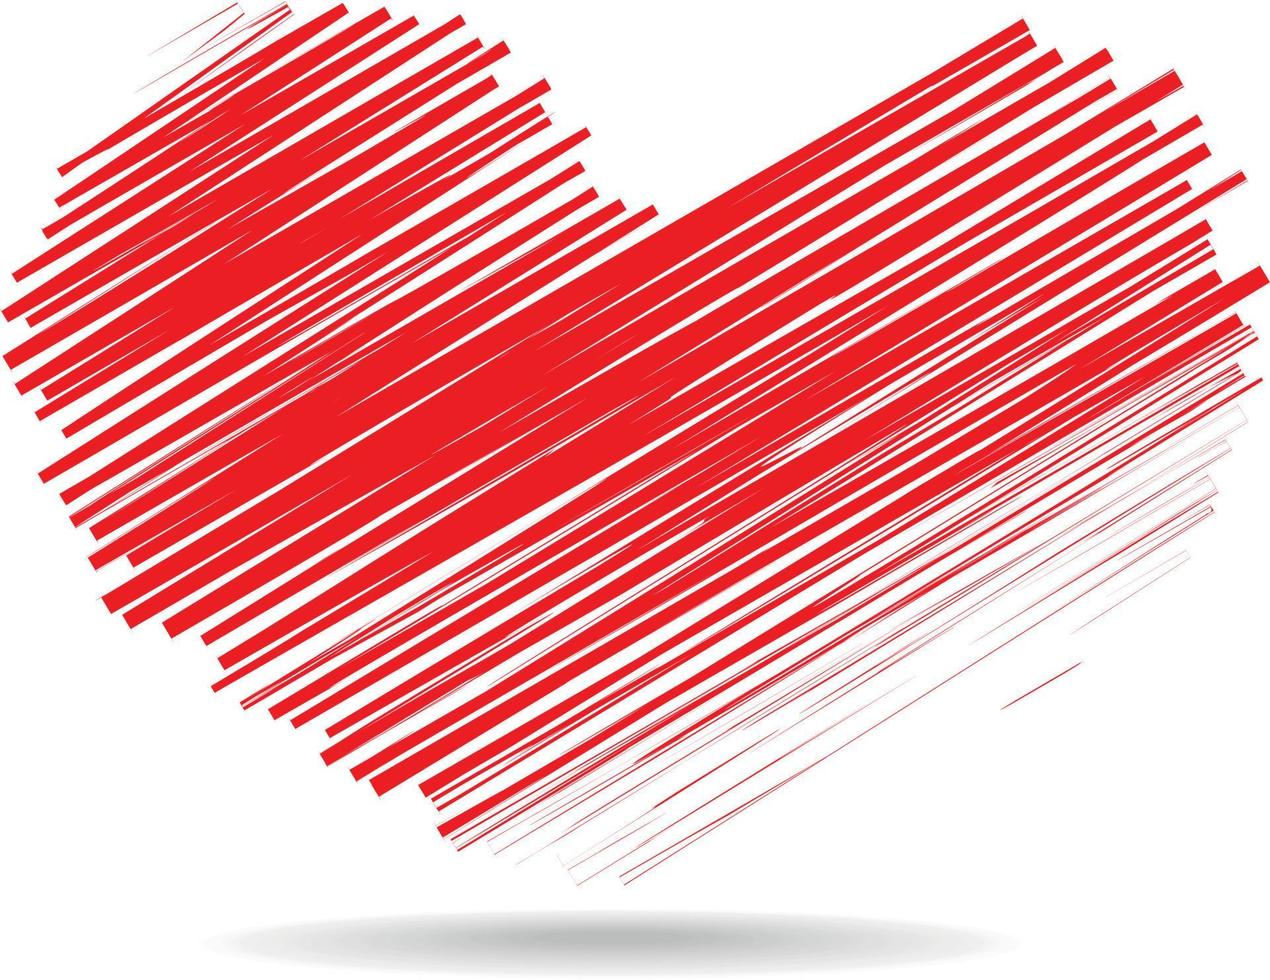 Vector Image Of Red Heart Made With Scribbled Lines